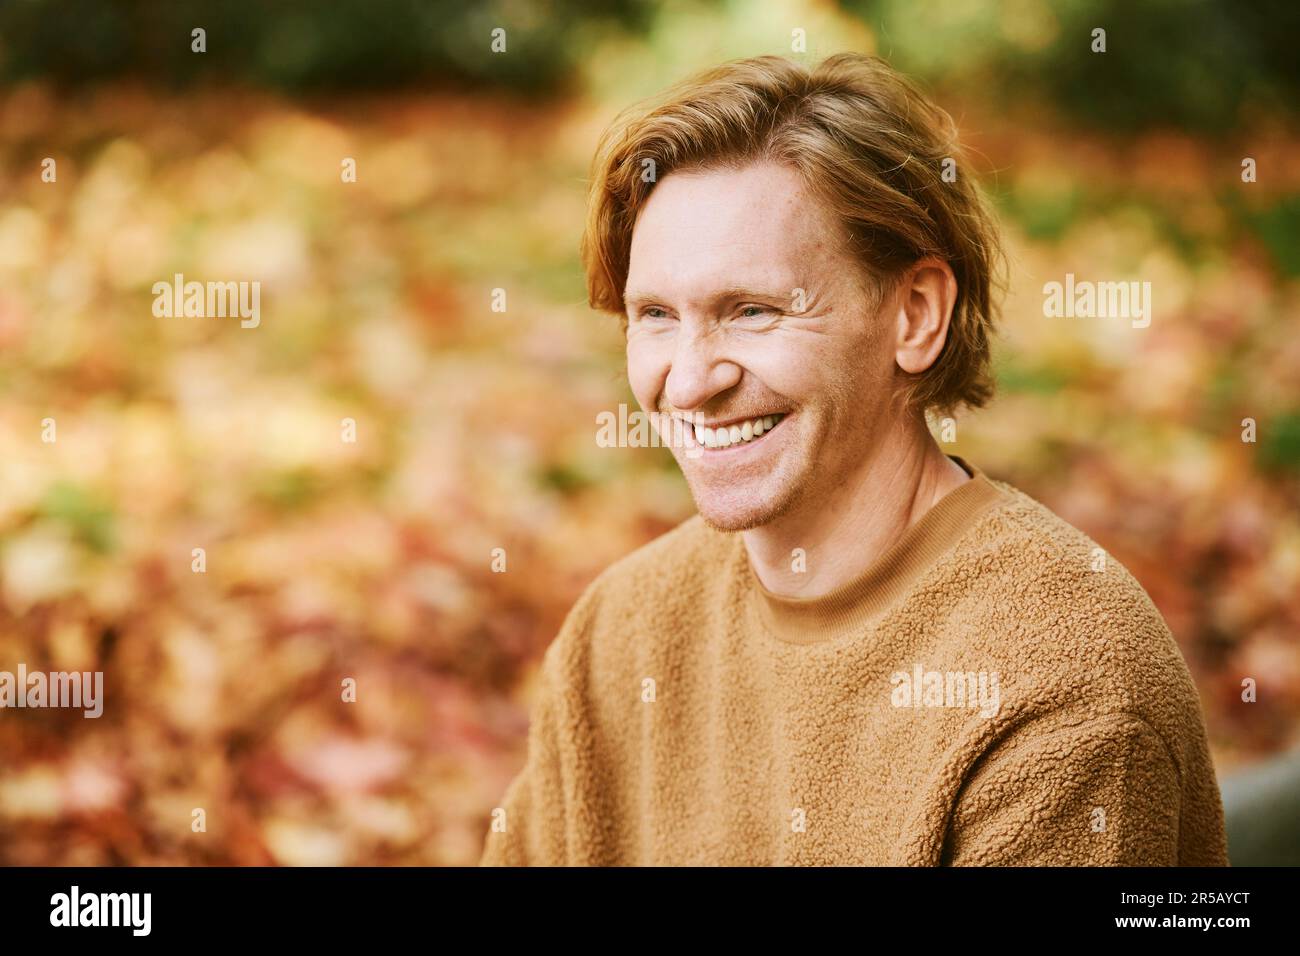 Close up portrait of handsome laughing red-haired man wearing  beige fuzzy fleece sweater Stock Photo